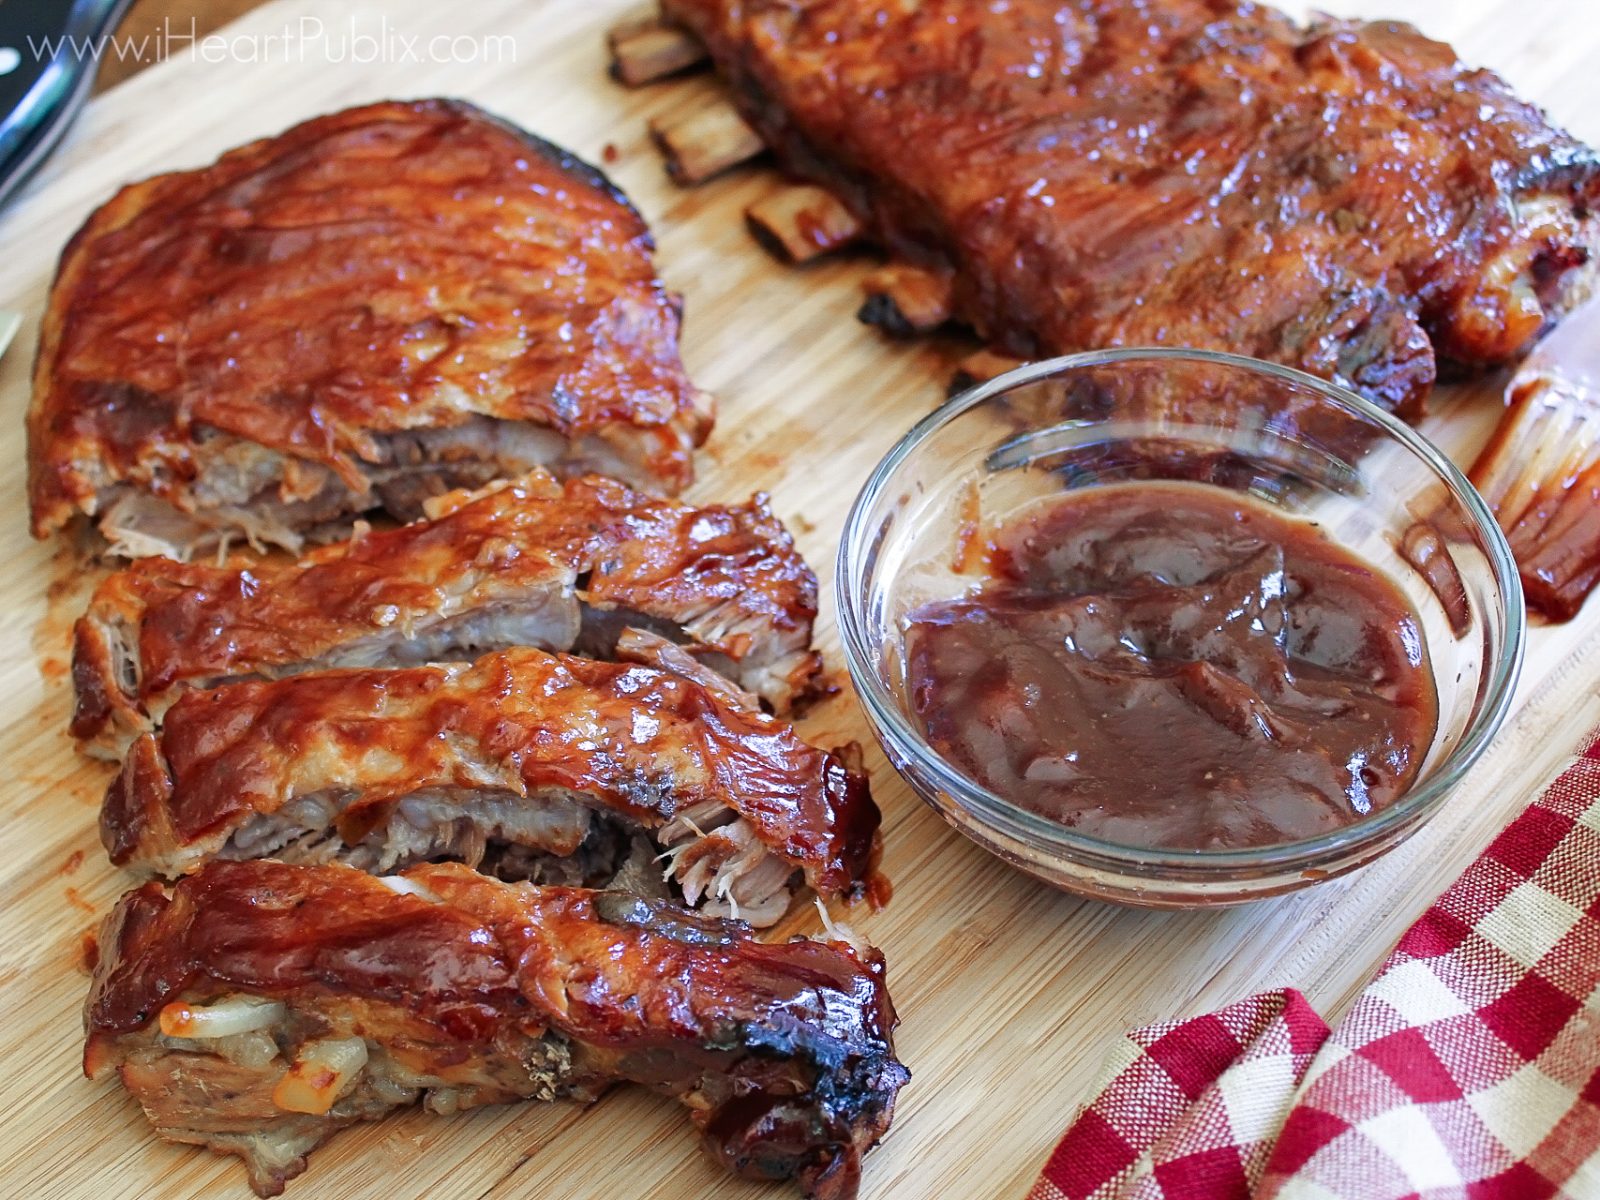 Easy Slow Cooker St. Louis Style Ribs – Super Meal With The Sales This Week At Publix